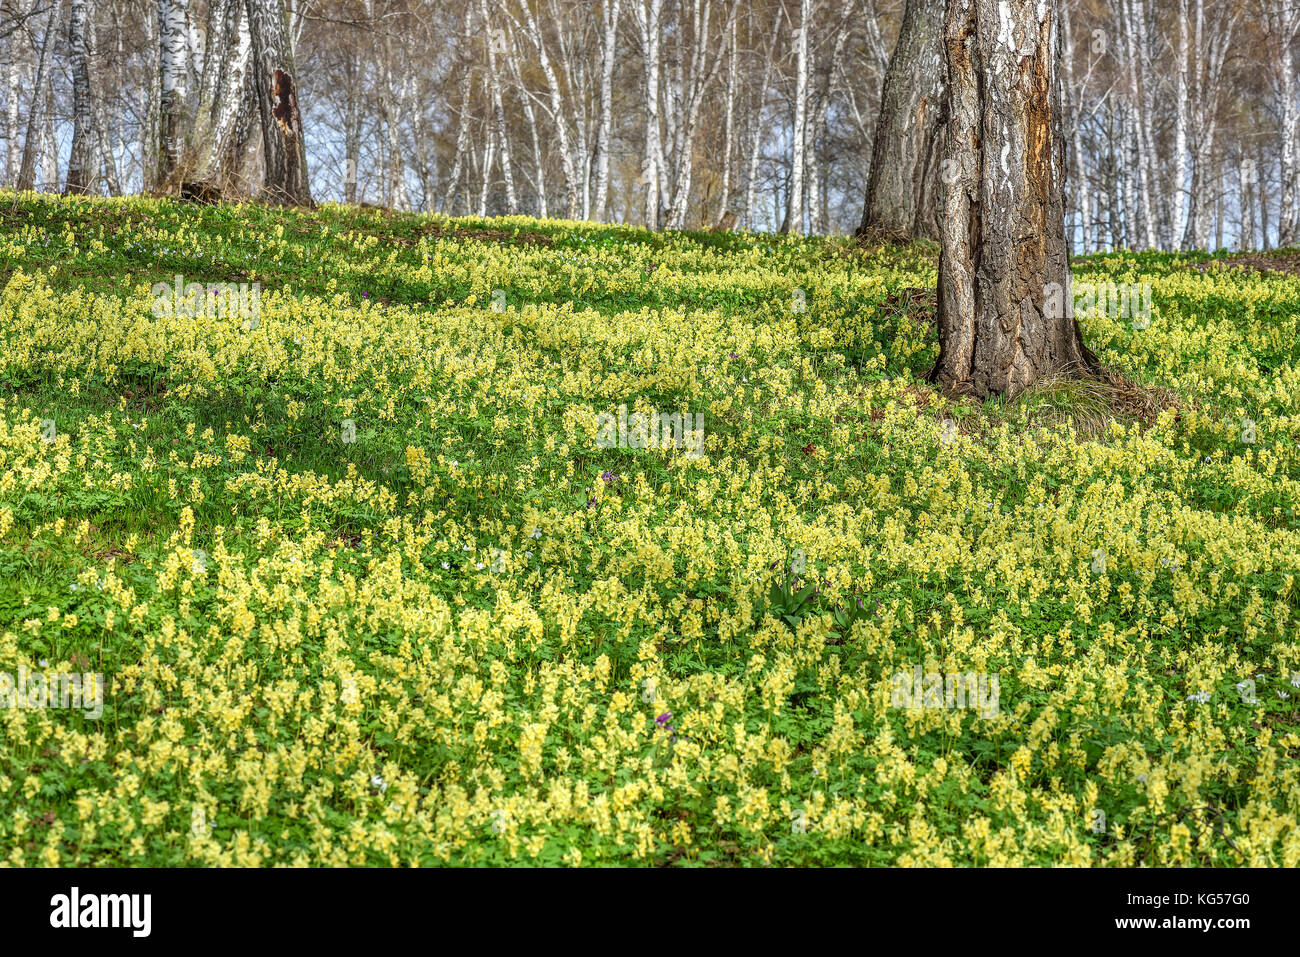 Beautiful spring floral background with bright yellow flowers Corydalis on a meadow in the grass on a blurred background of trunks of birches Stock Photo